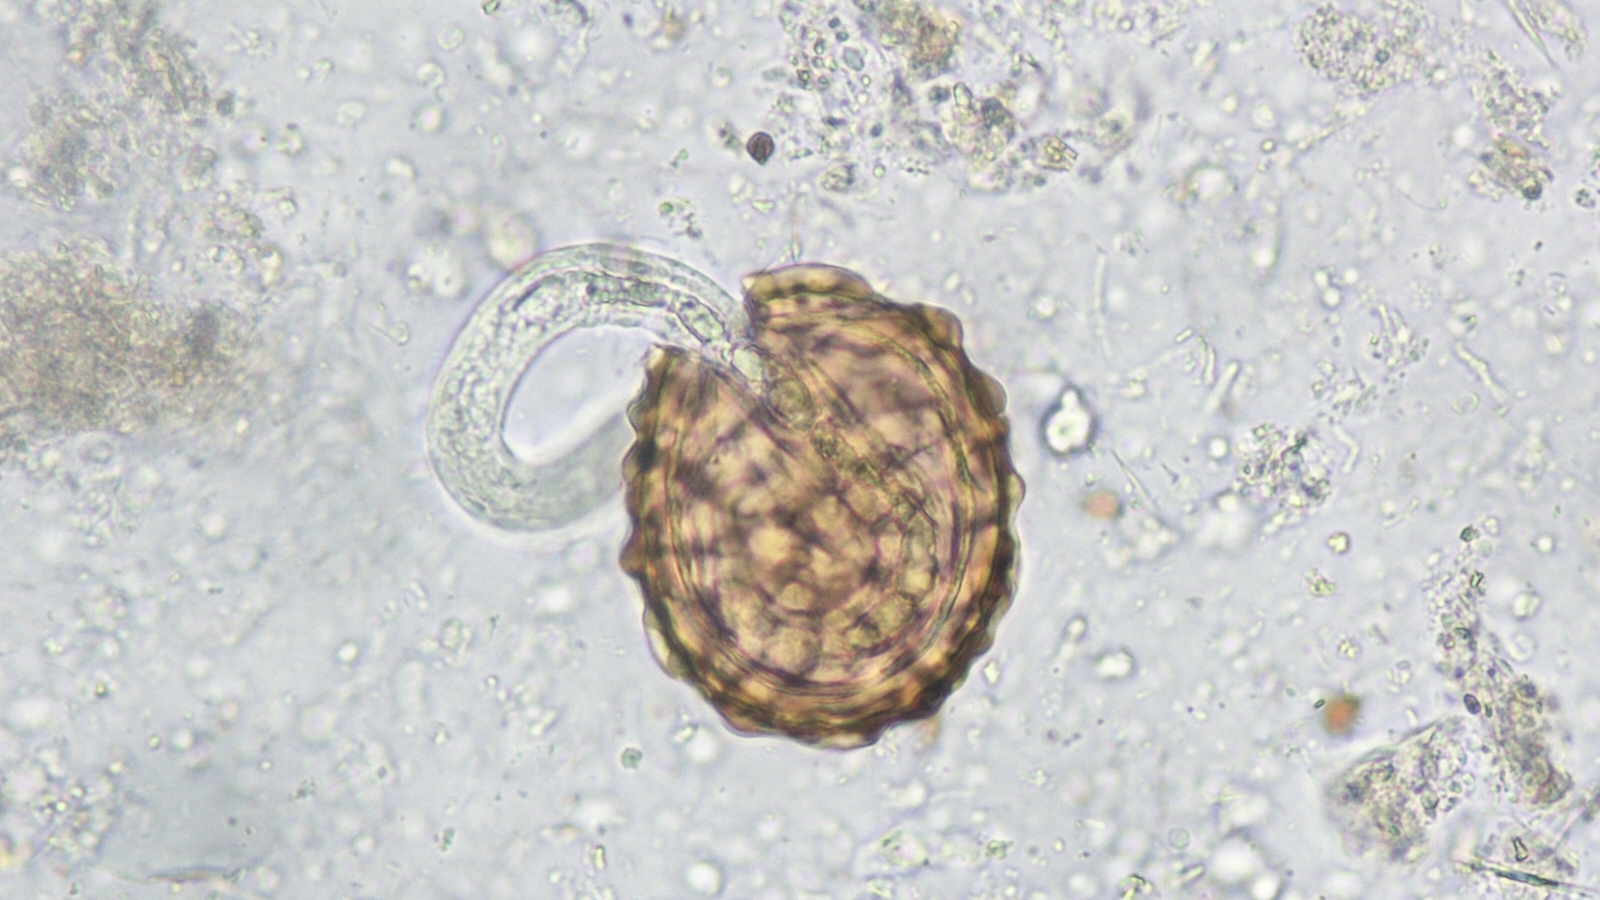 Ascaris egg as seen by a microscope, hatching to release an immature worm. Image courtesy of Emily Fernholz, MT(ASCP), Mayo Clinic